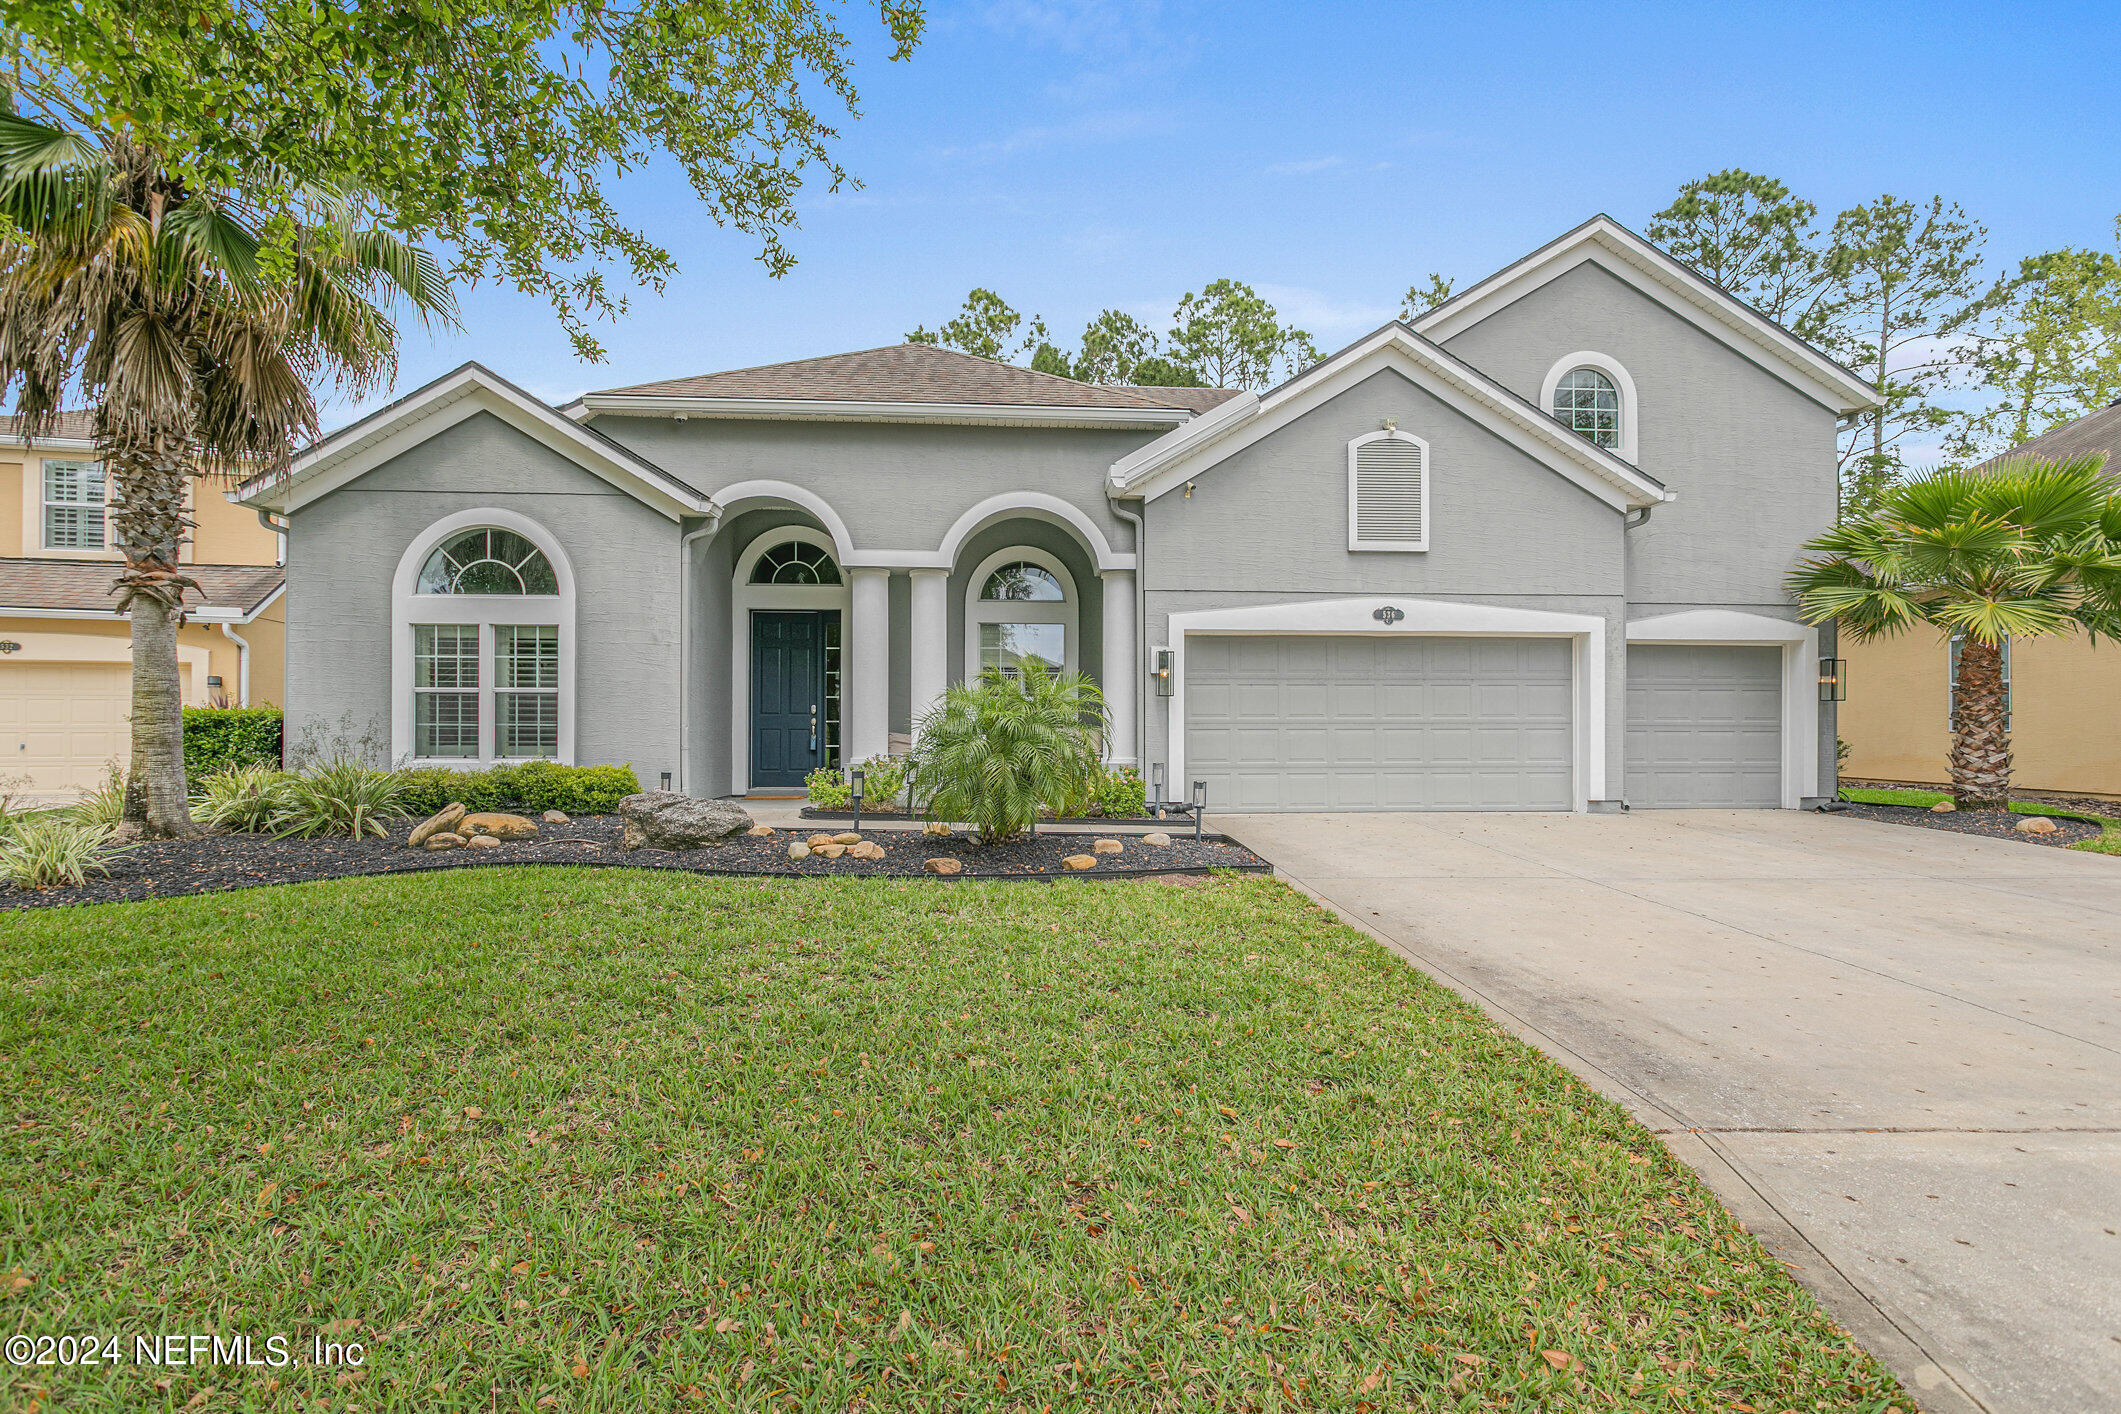 St Johns, FL home for sale located at 536 SADDLESTONE Drive, St Johns, FL 32259